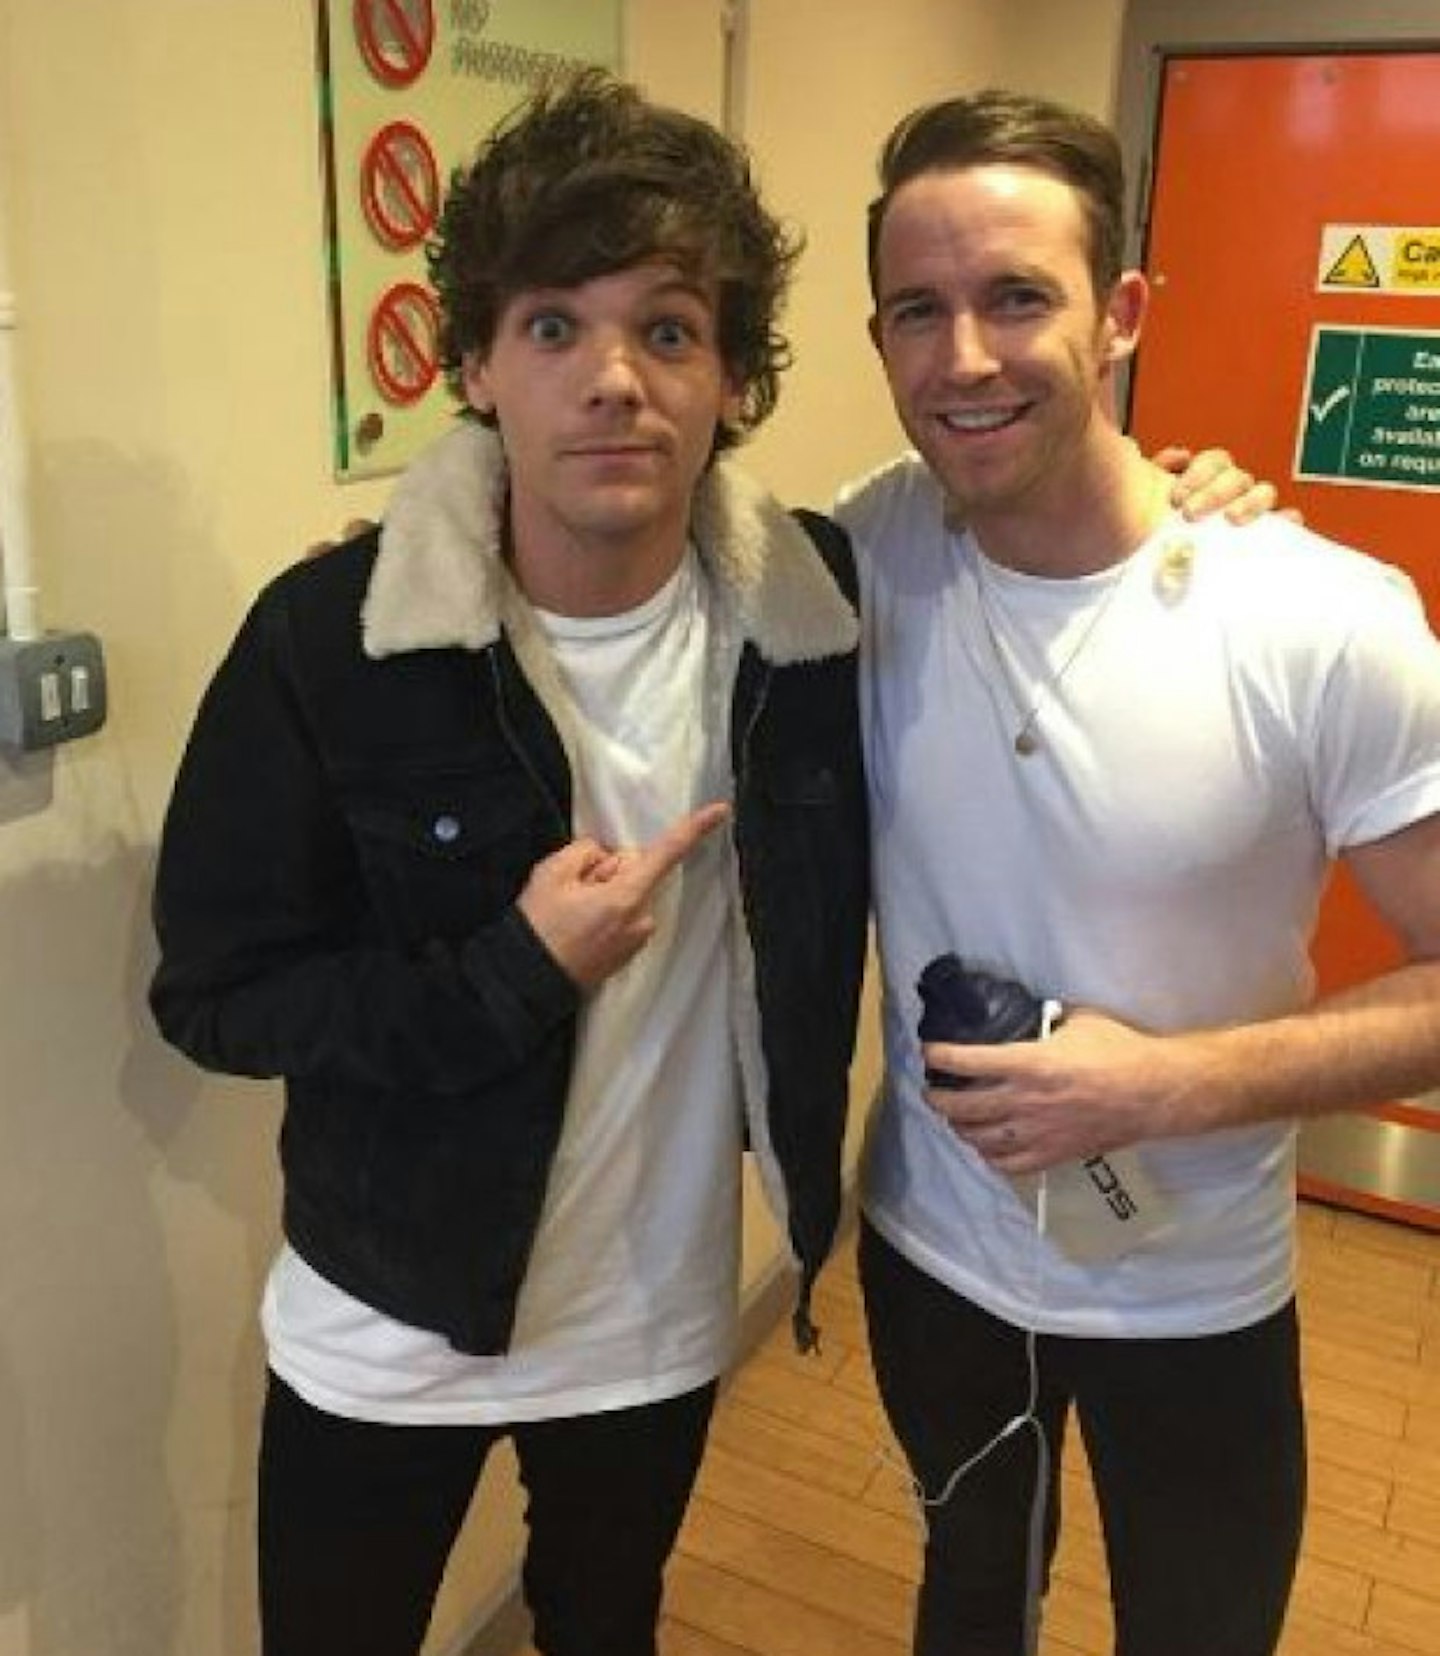 Jay and Louis Tomlinson had a chat backstage